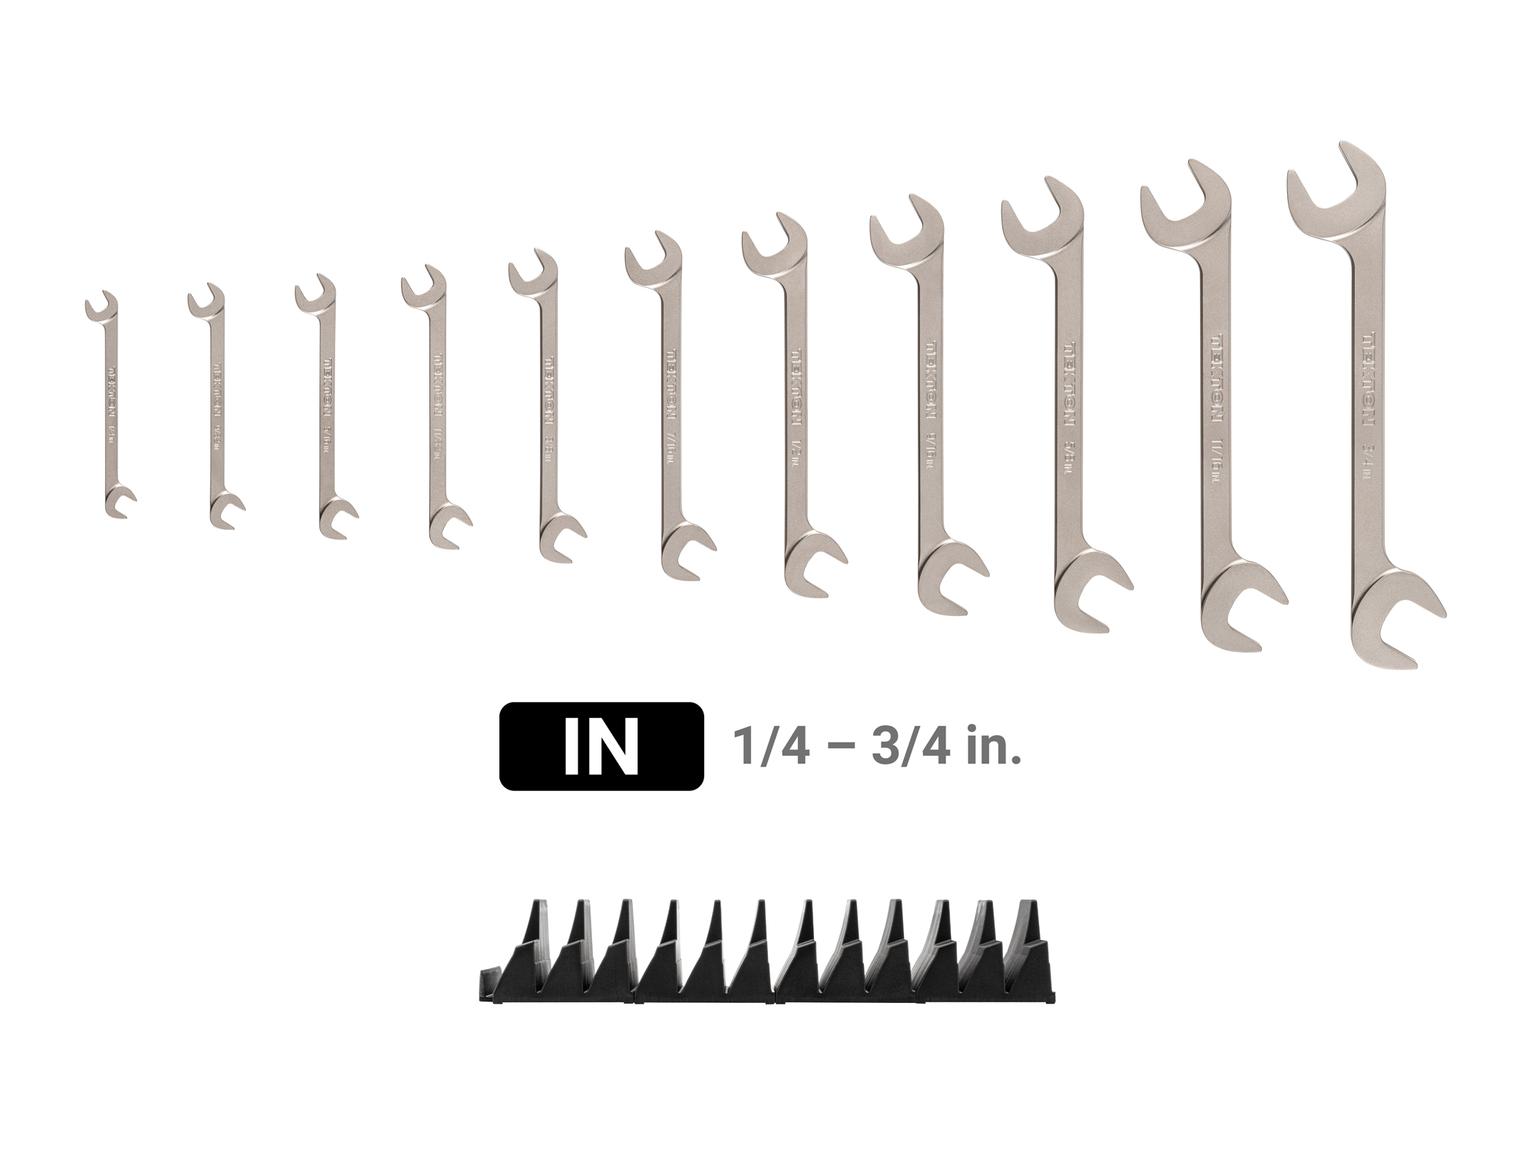 TEKTON WAE91501-T Angle Head Open End Wrench Set with Modular Slotted Organizer, 11-Piece (1/4-3/4 in.)